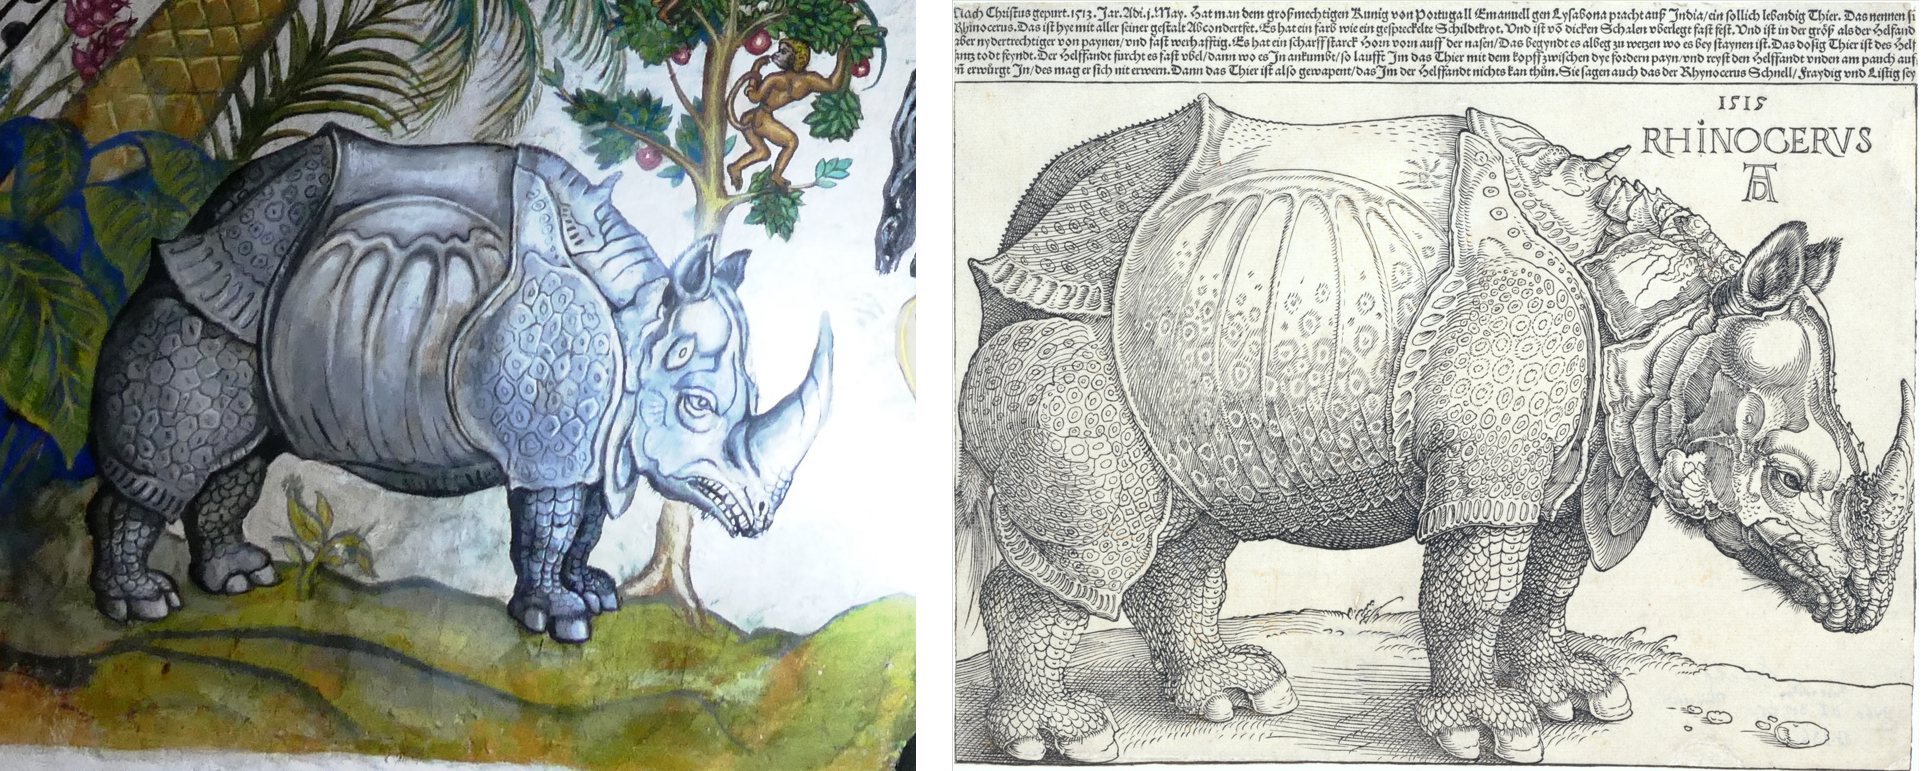 Left: Murals in the House of the Scribe, detail of the rhinoceros (photo: Stefanrevollo, CC BY-SA 4.0). Right: Albrecht Dürer, Rhinoceros, 1515.